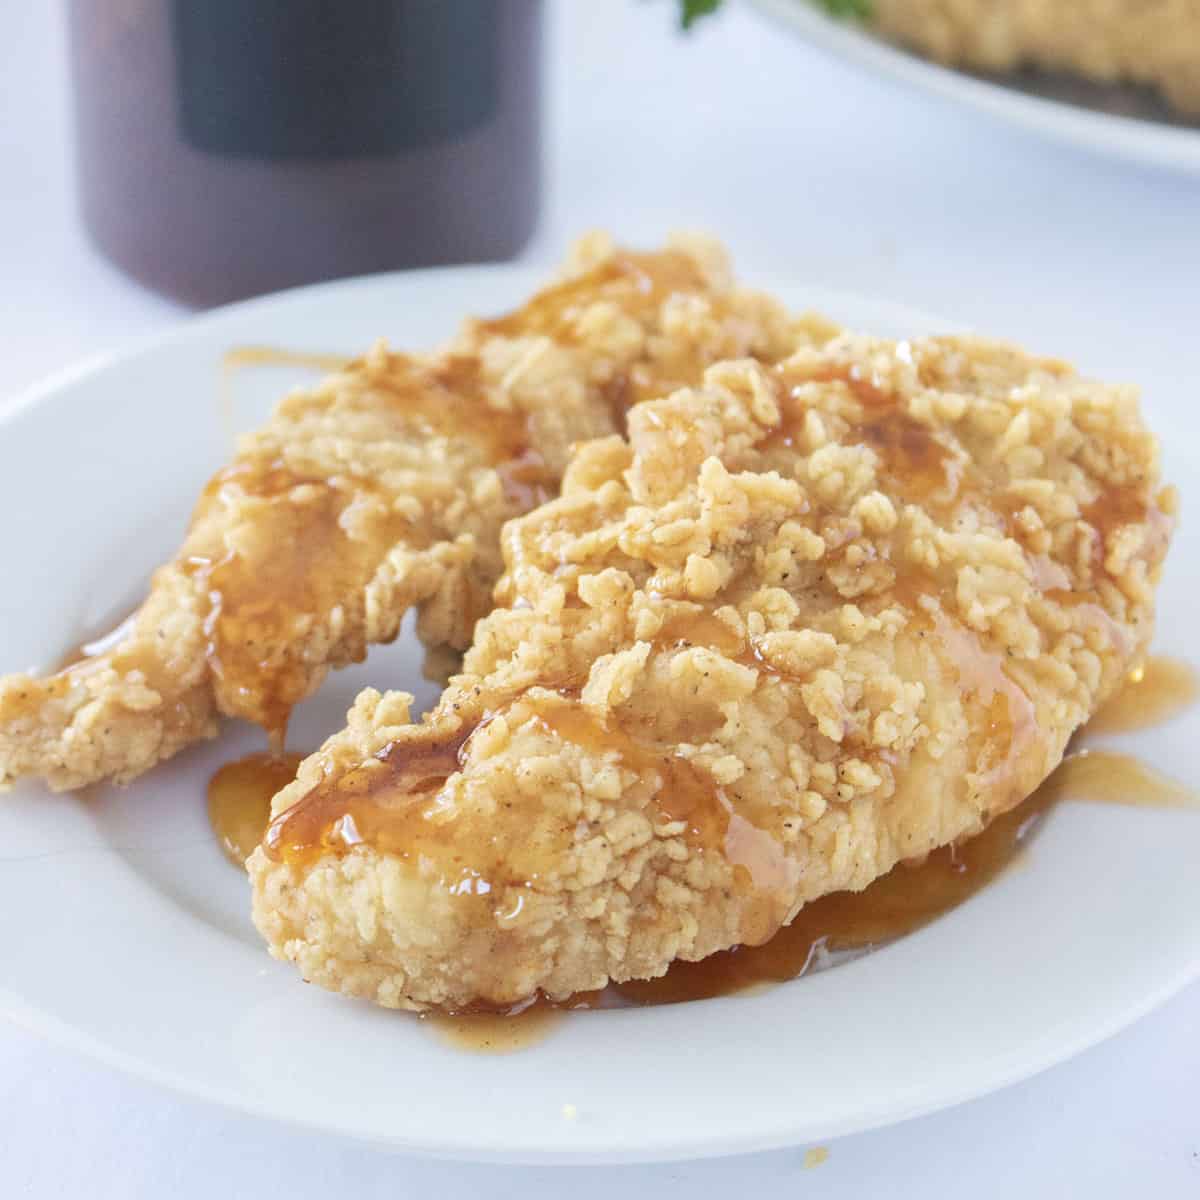 Hot Honey Sauce drizzled on the top of fried chicken tenders.